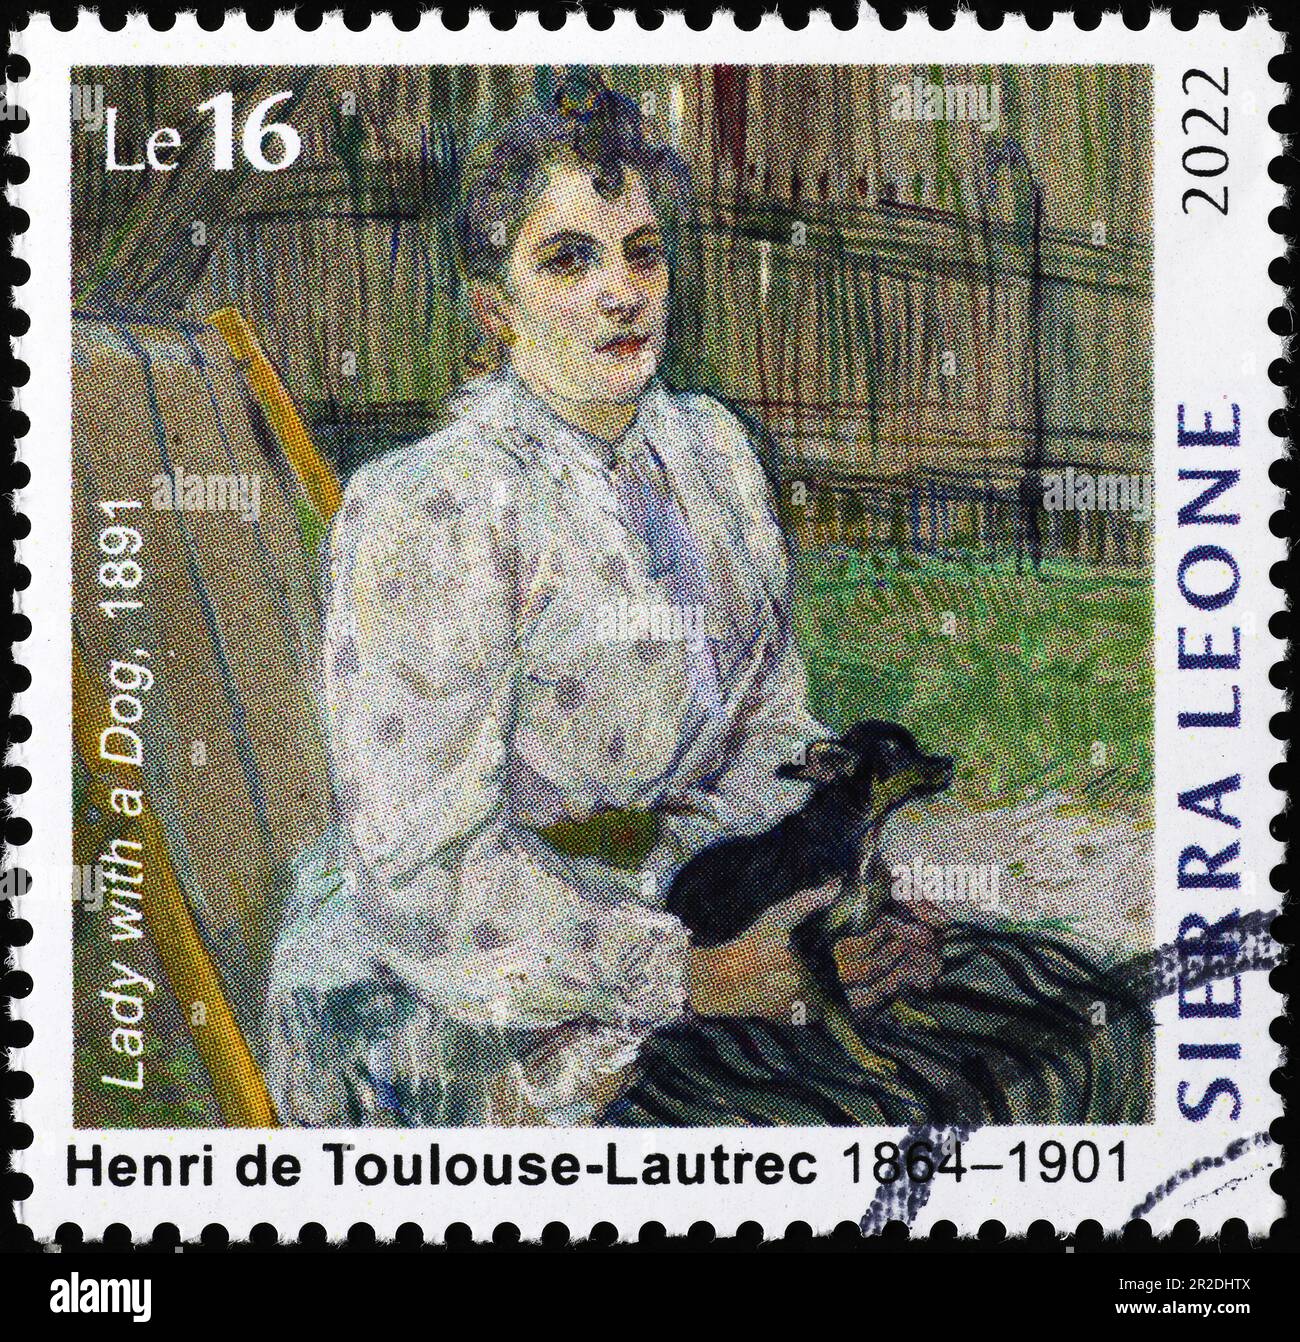 Lady with a dog by Toulouse-Lautrec on postage stamp Stock Photo